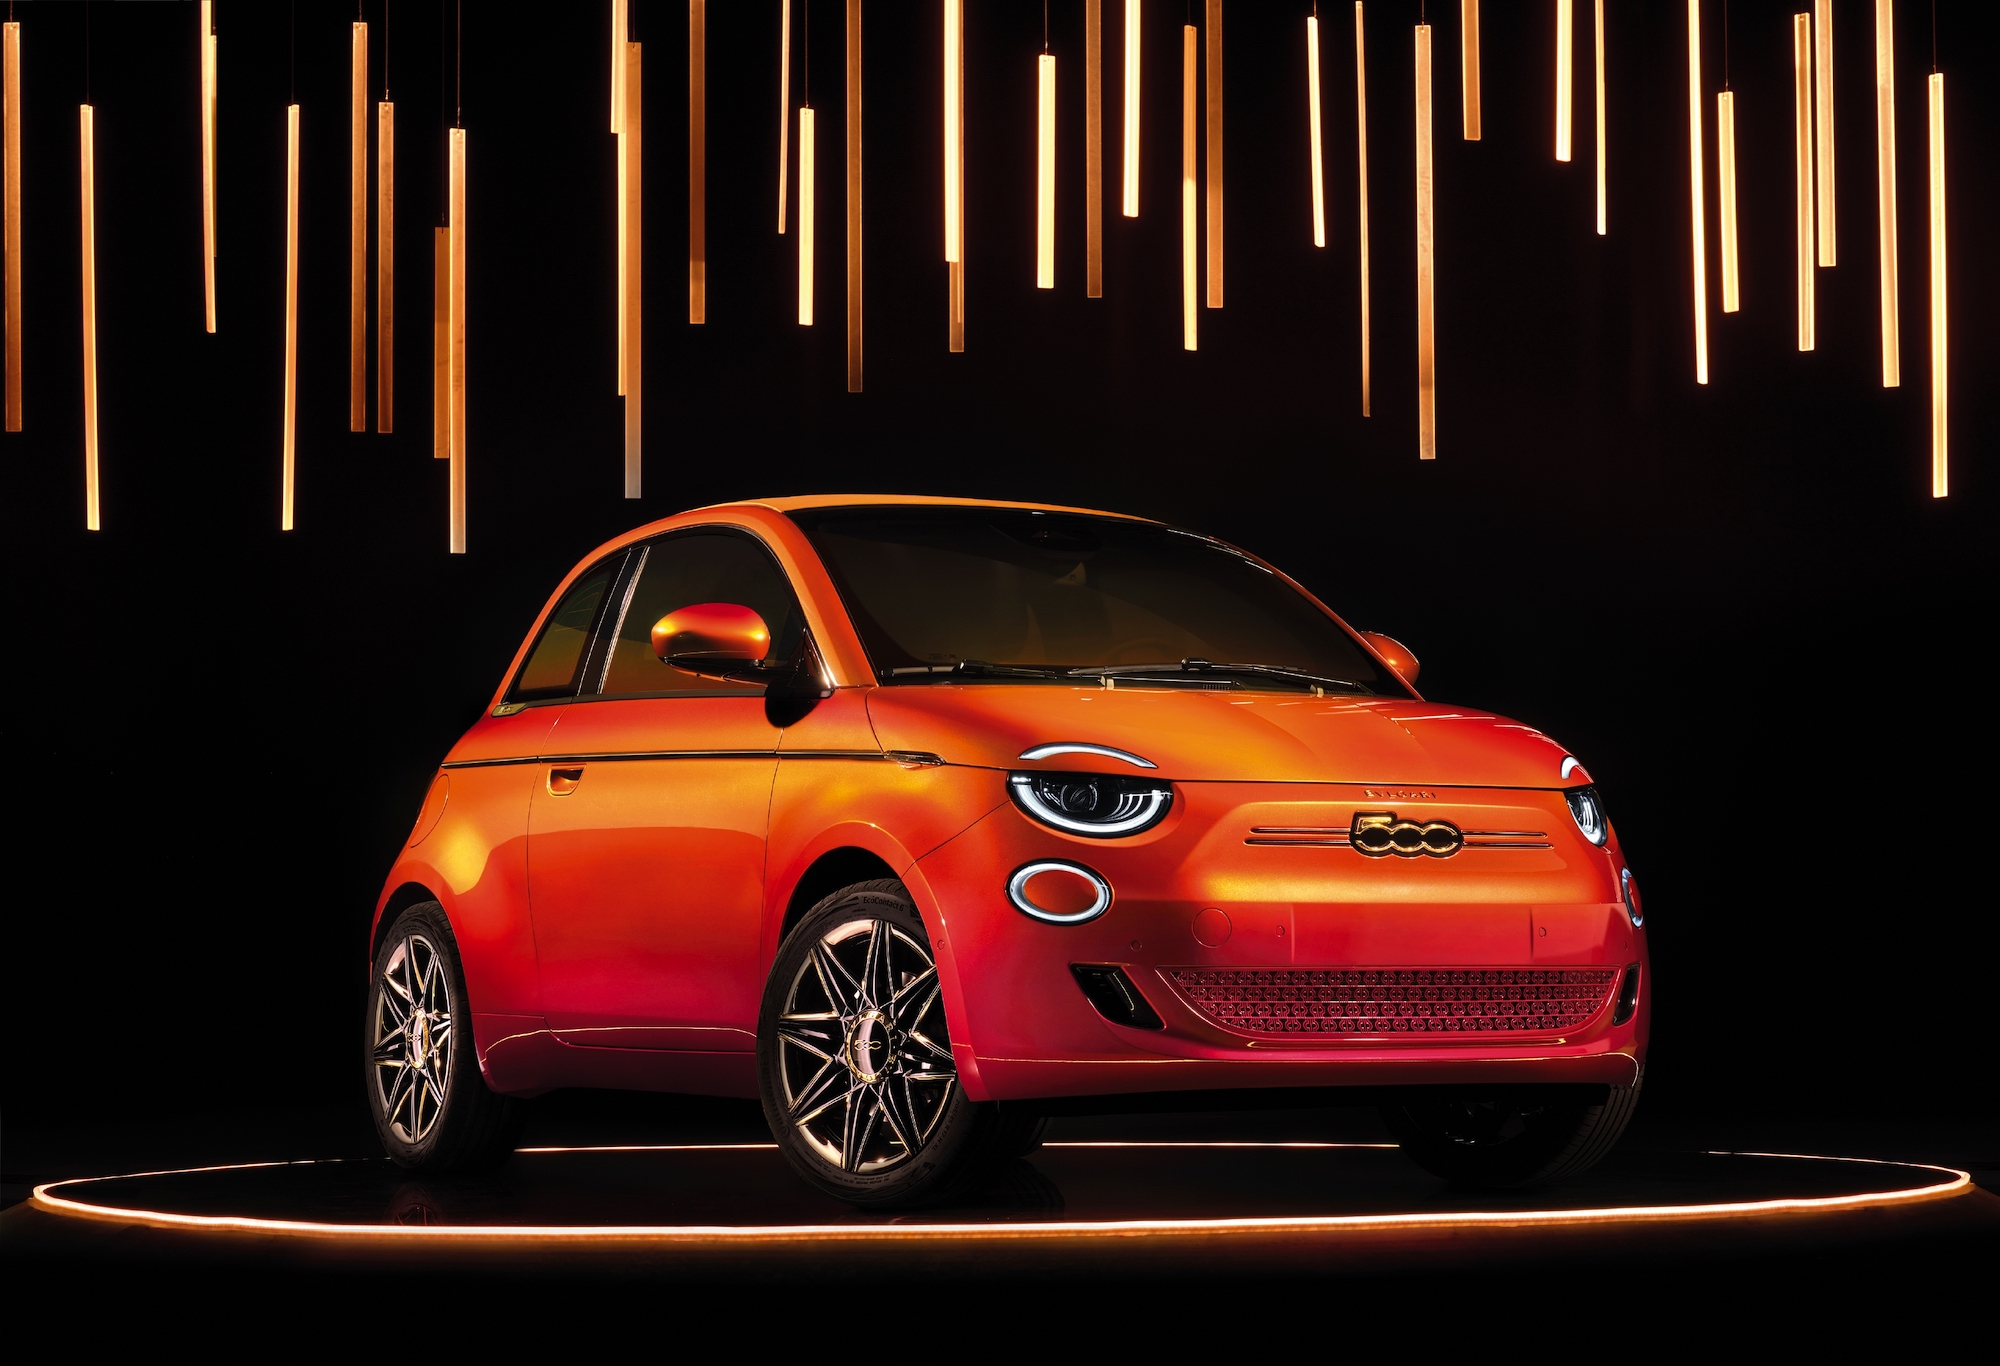 Fiat wants its small new EV to be a luxurious ‘fashion accessory’